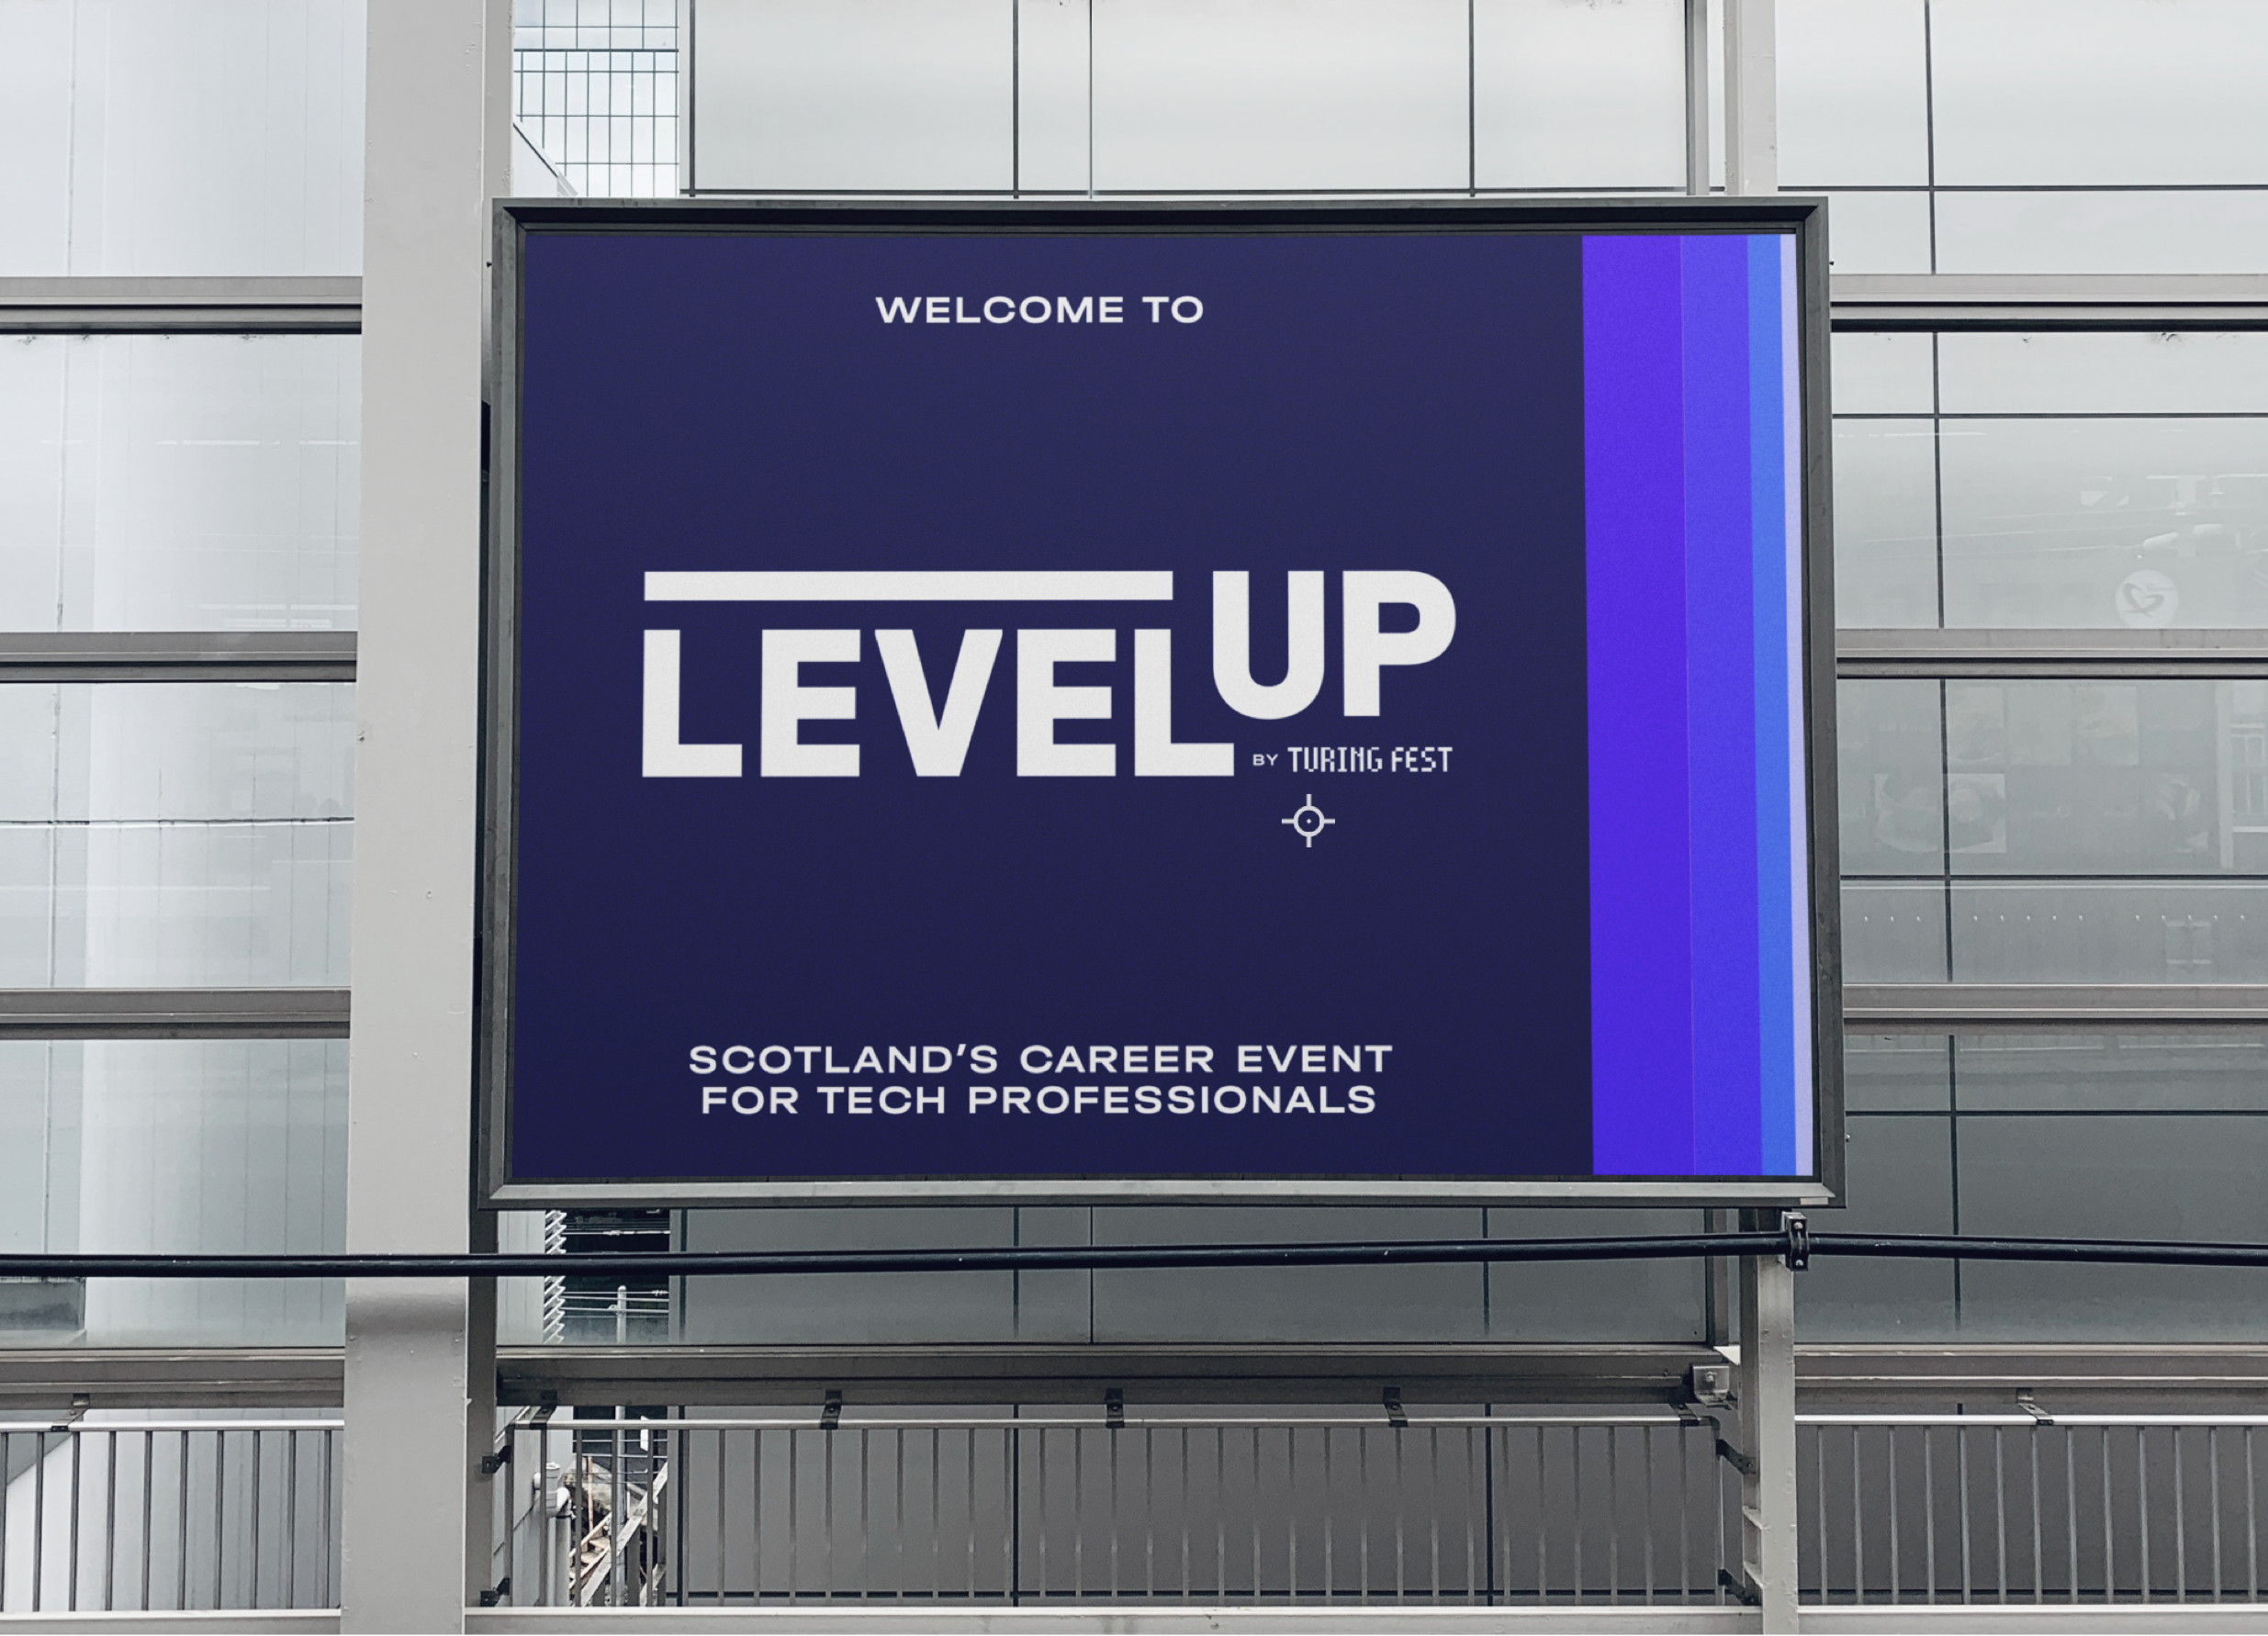 A picture of a sign saying “Welcome to Level Up By Turing Fest Scotland's Career Event For Tech Professionals”, over a background of vertical stripes in different shades of blue